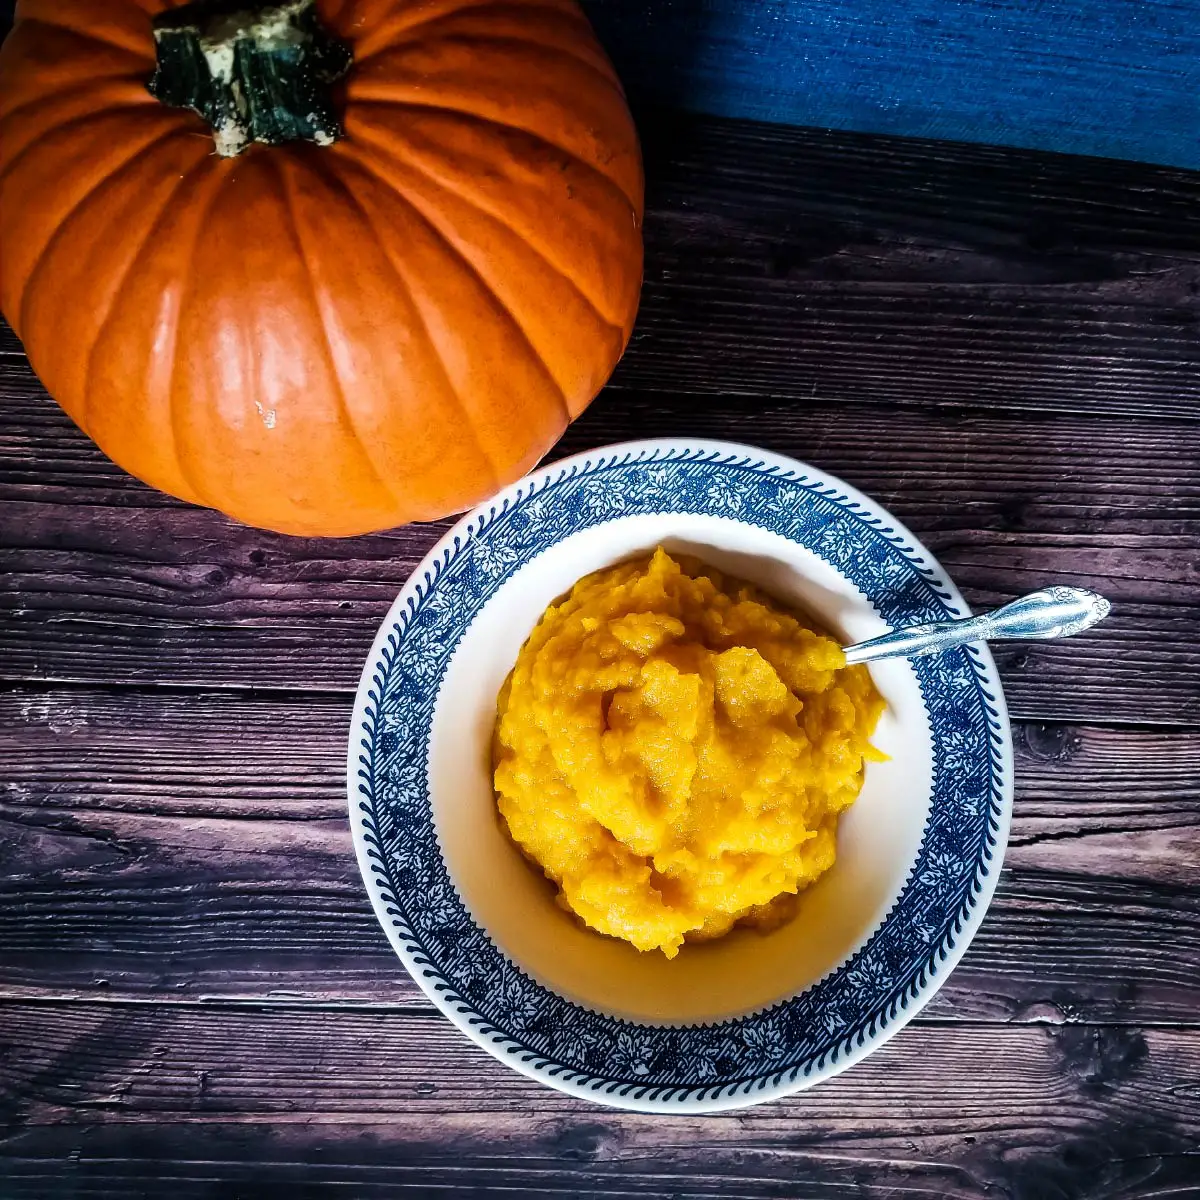 Pumpkin puree in a bowl after cooking and ready to use.